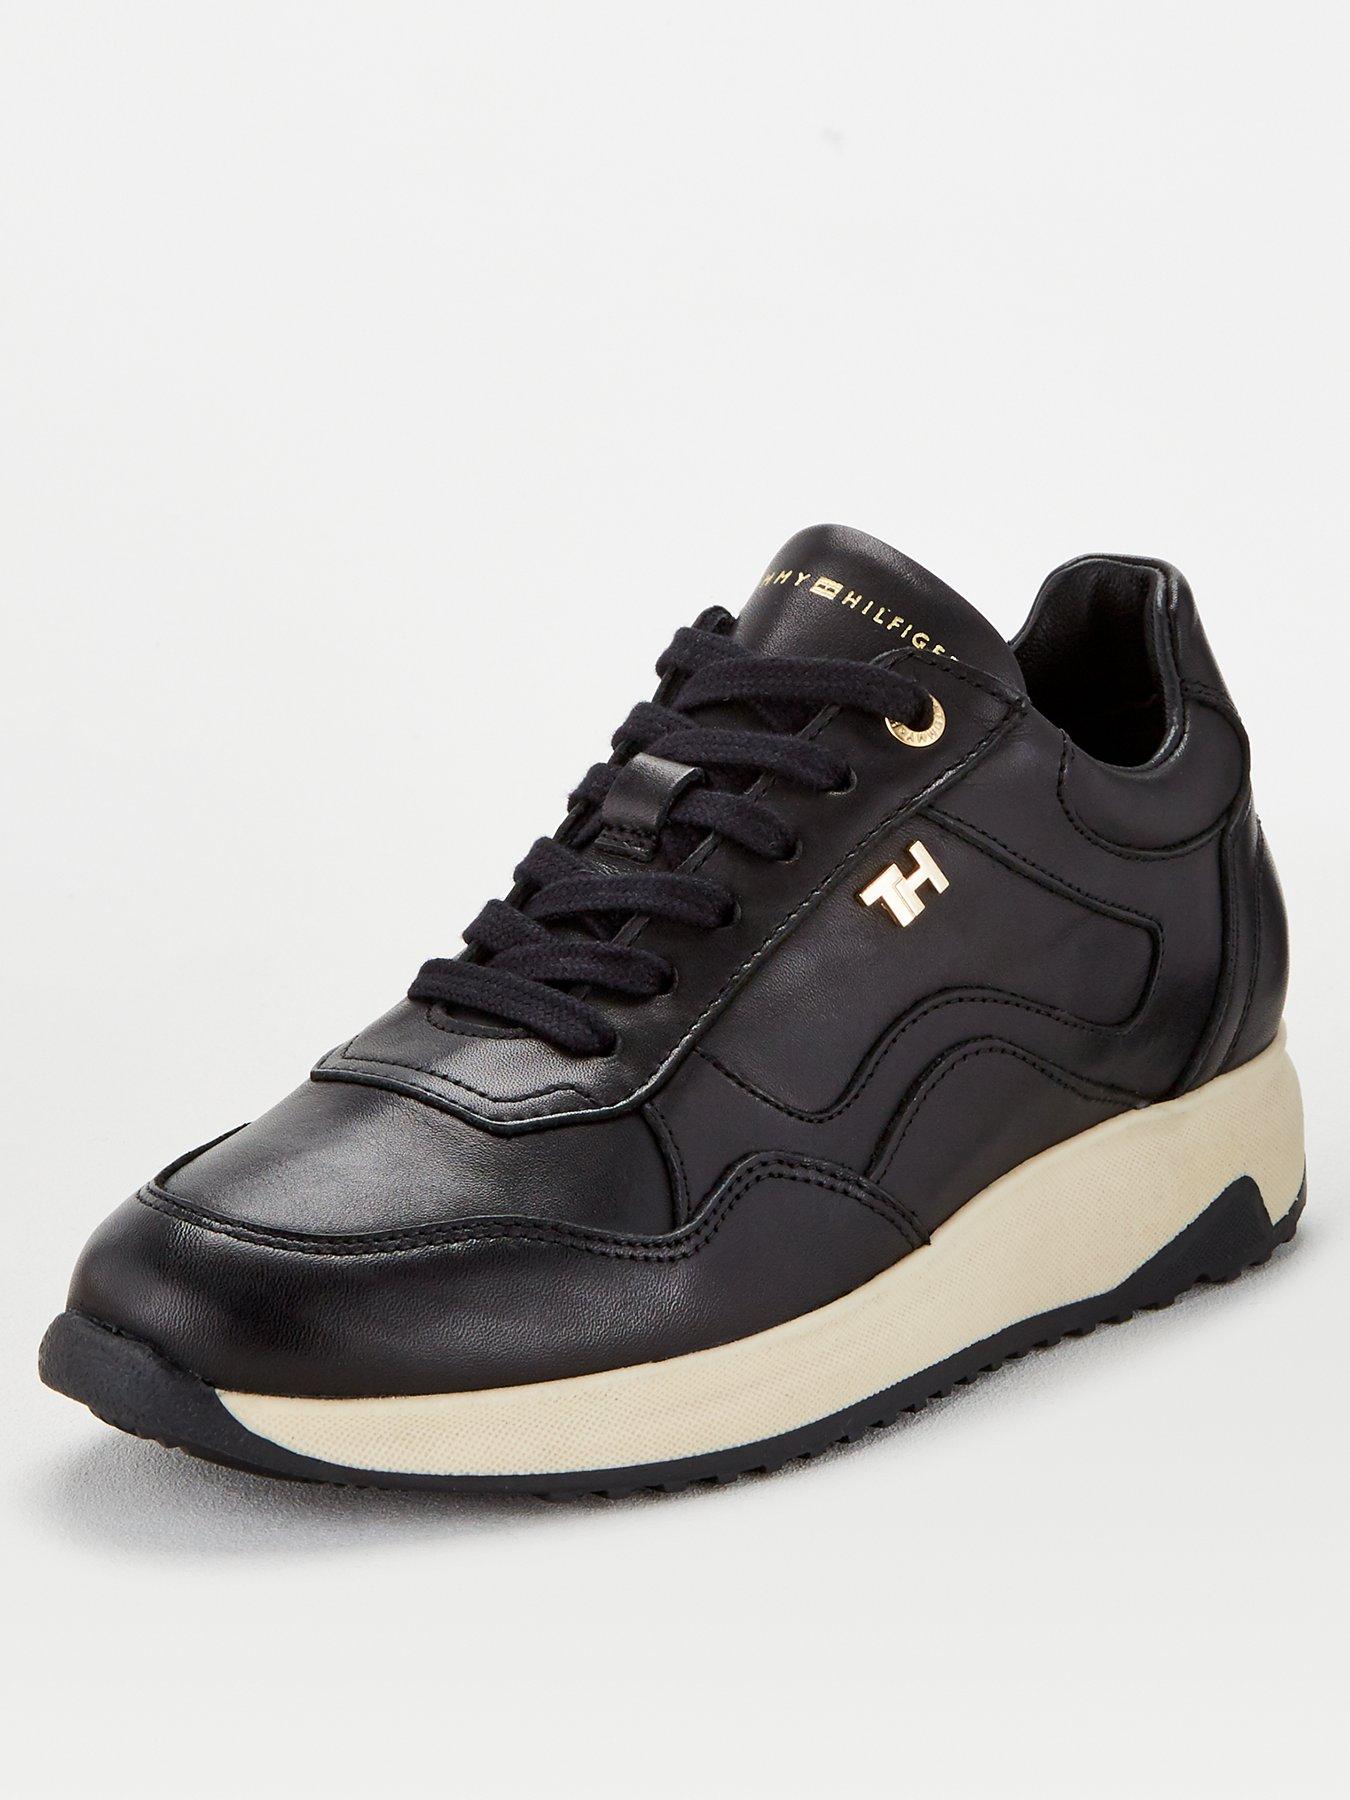 tommy hilfiger runners womens